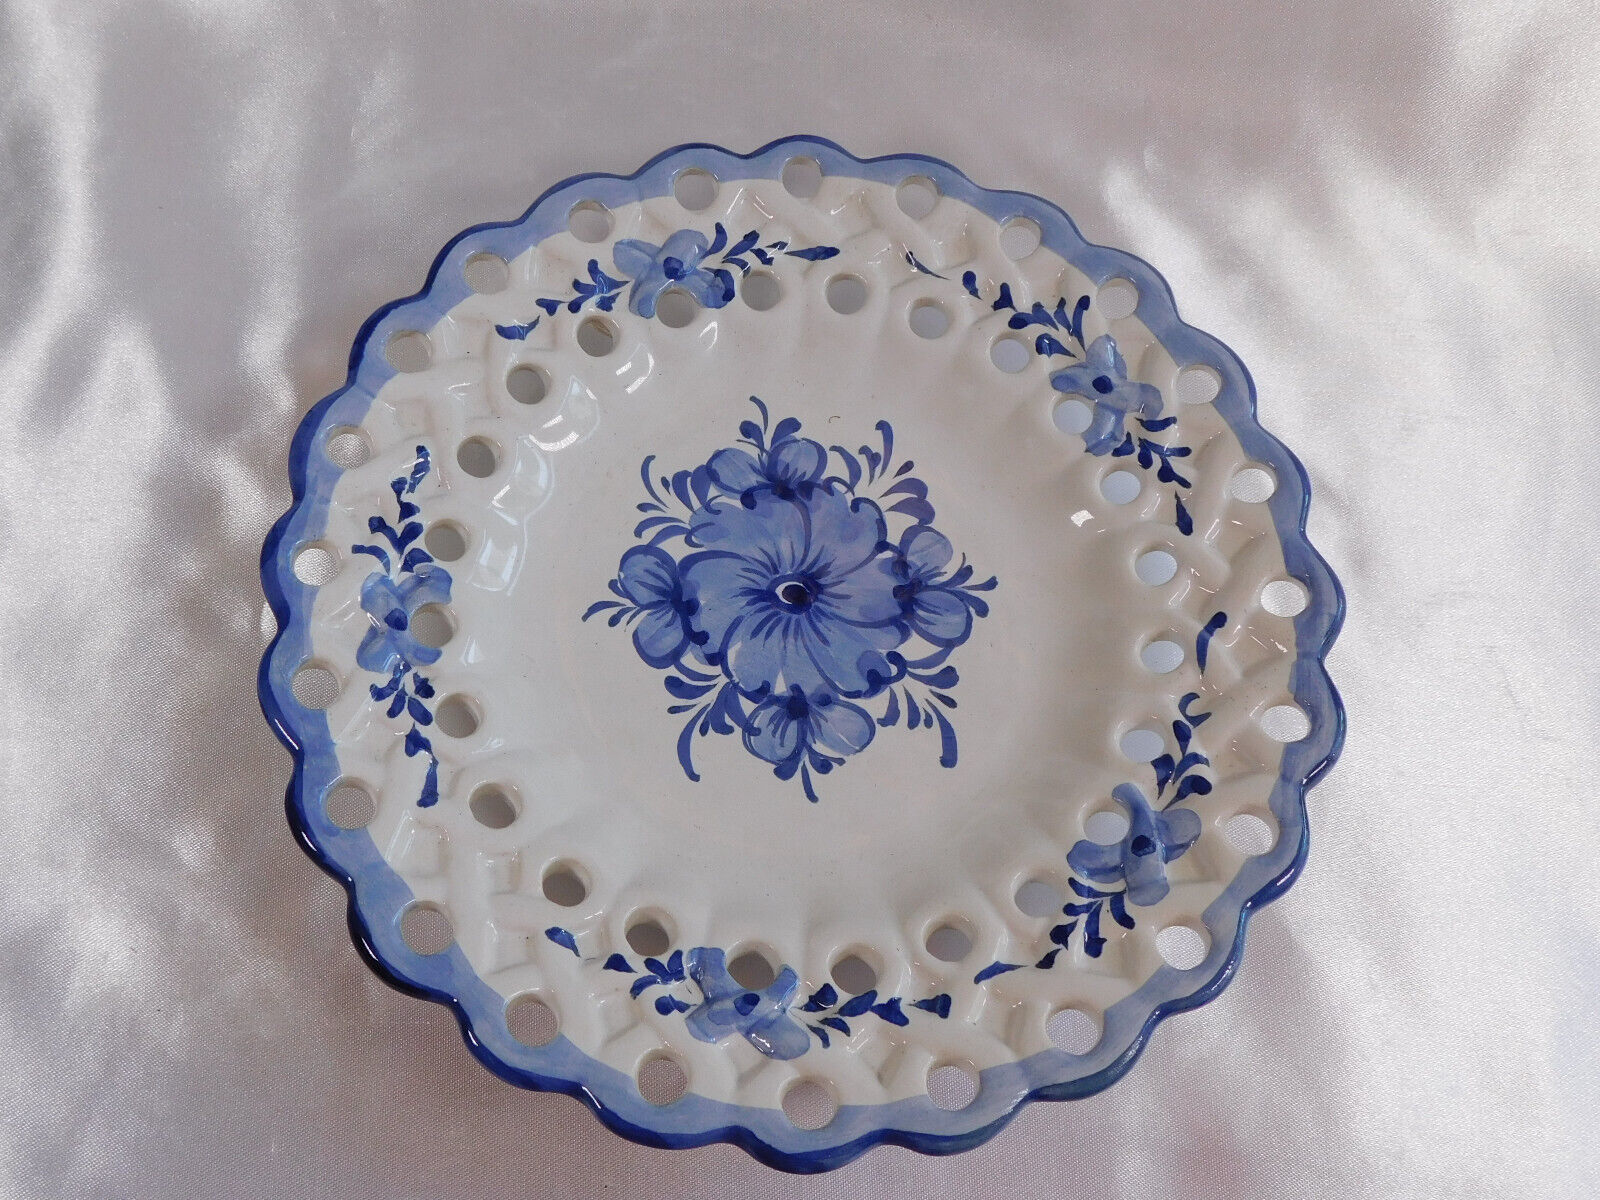 Primary image for Blue and White Floral Plate from Portugal # 23283